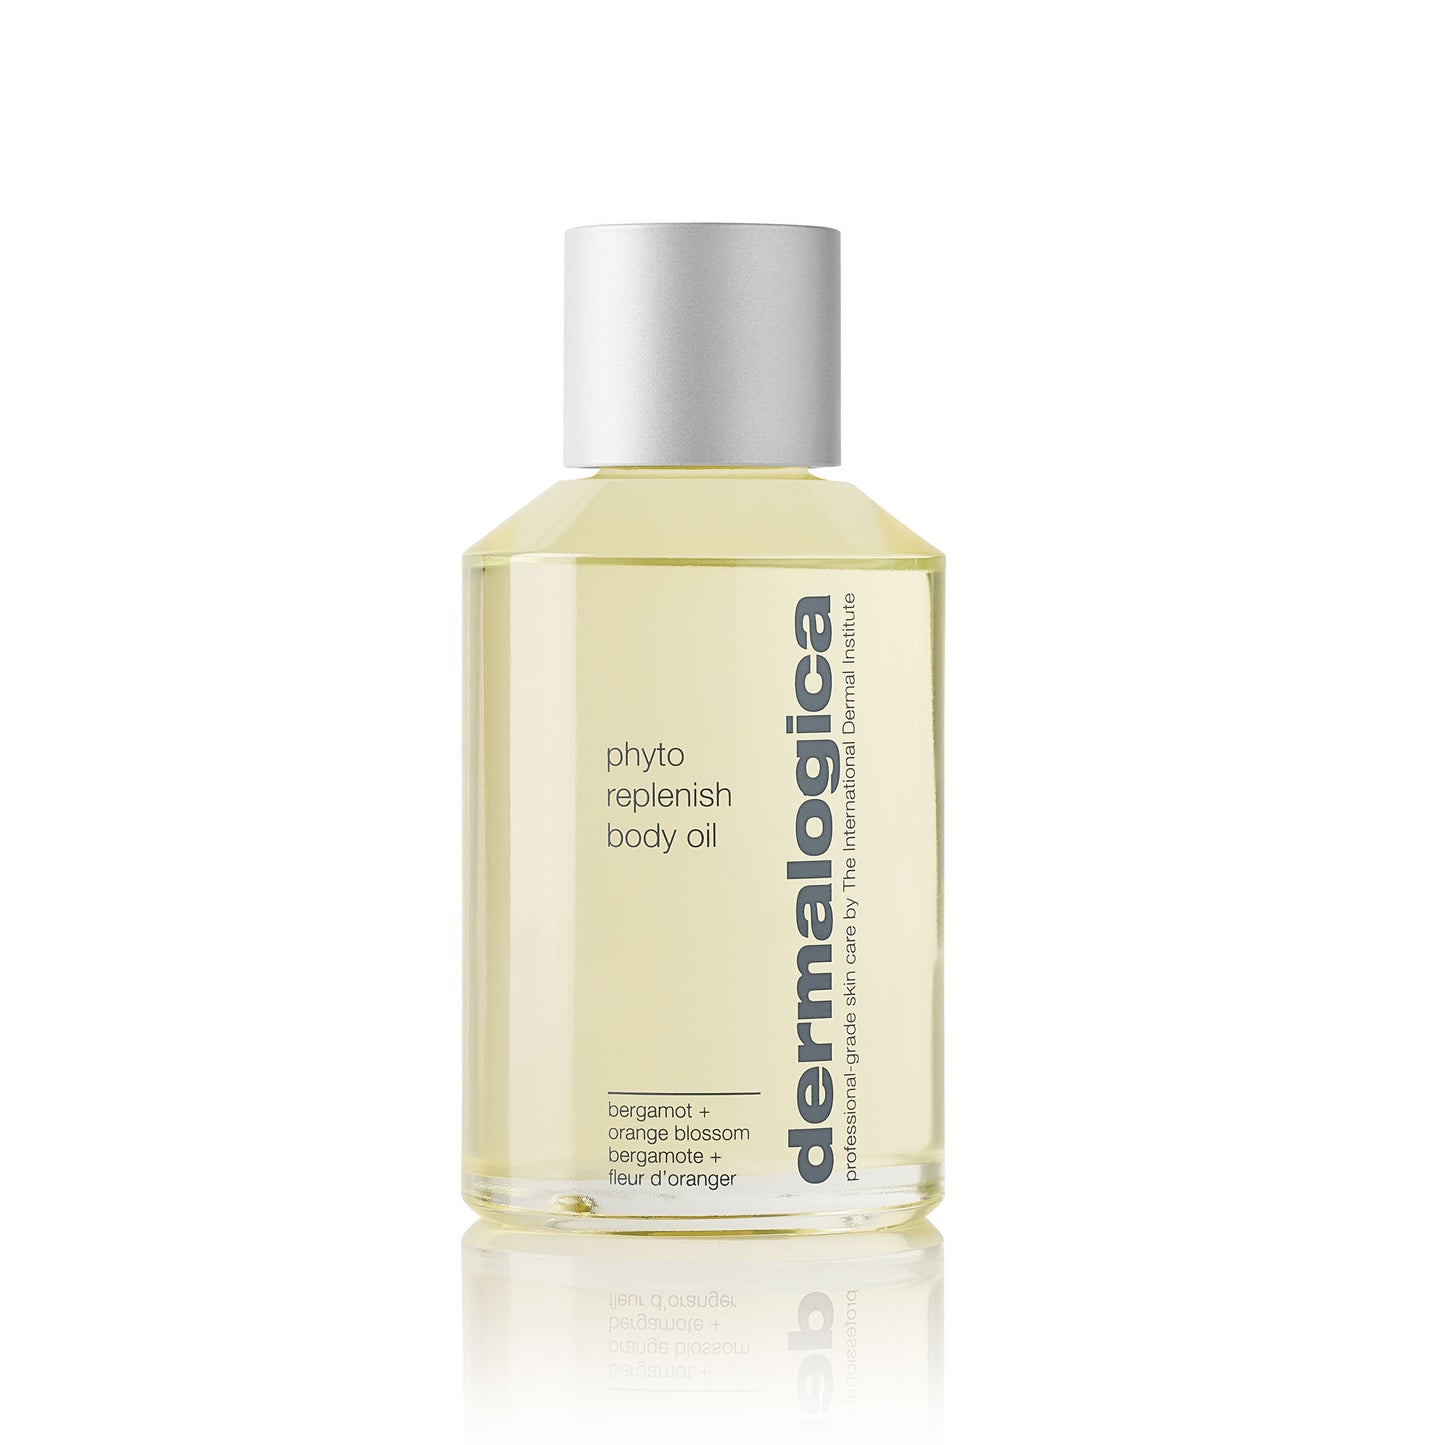 Phyto Replenish Body Oil product front